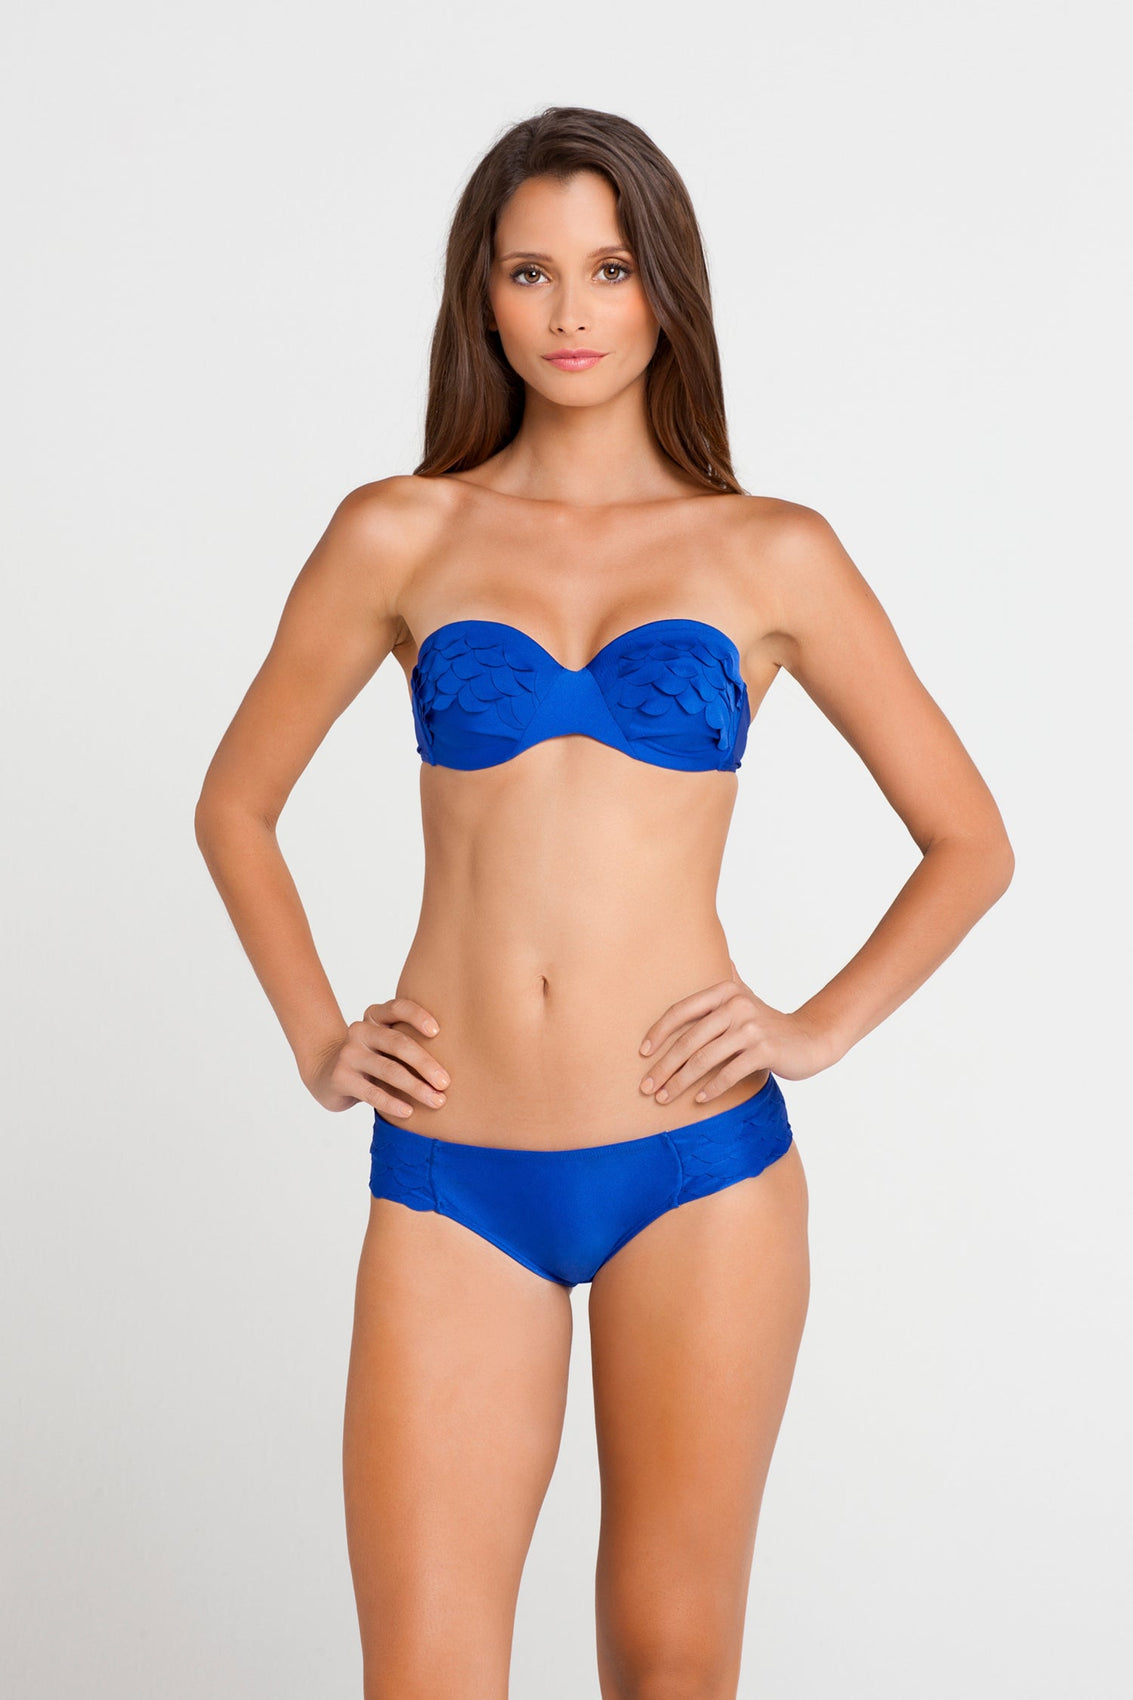 SI, SOY SIRENA - Scalloped Underwire Push Up Bandeau Top